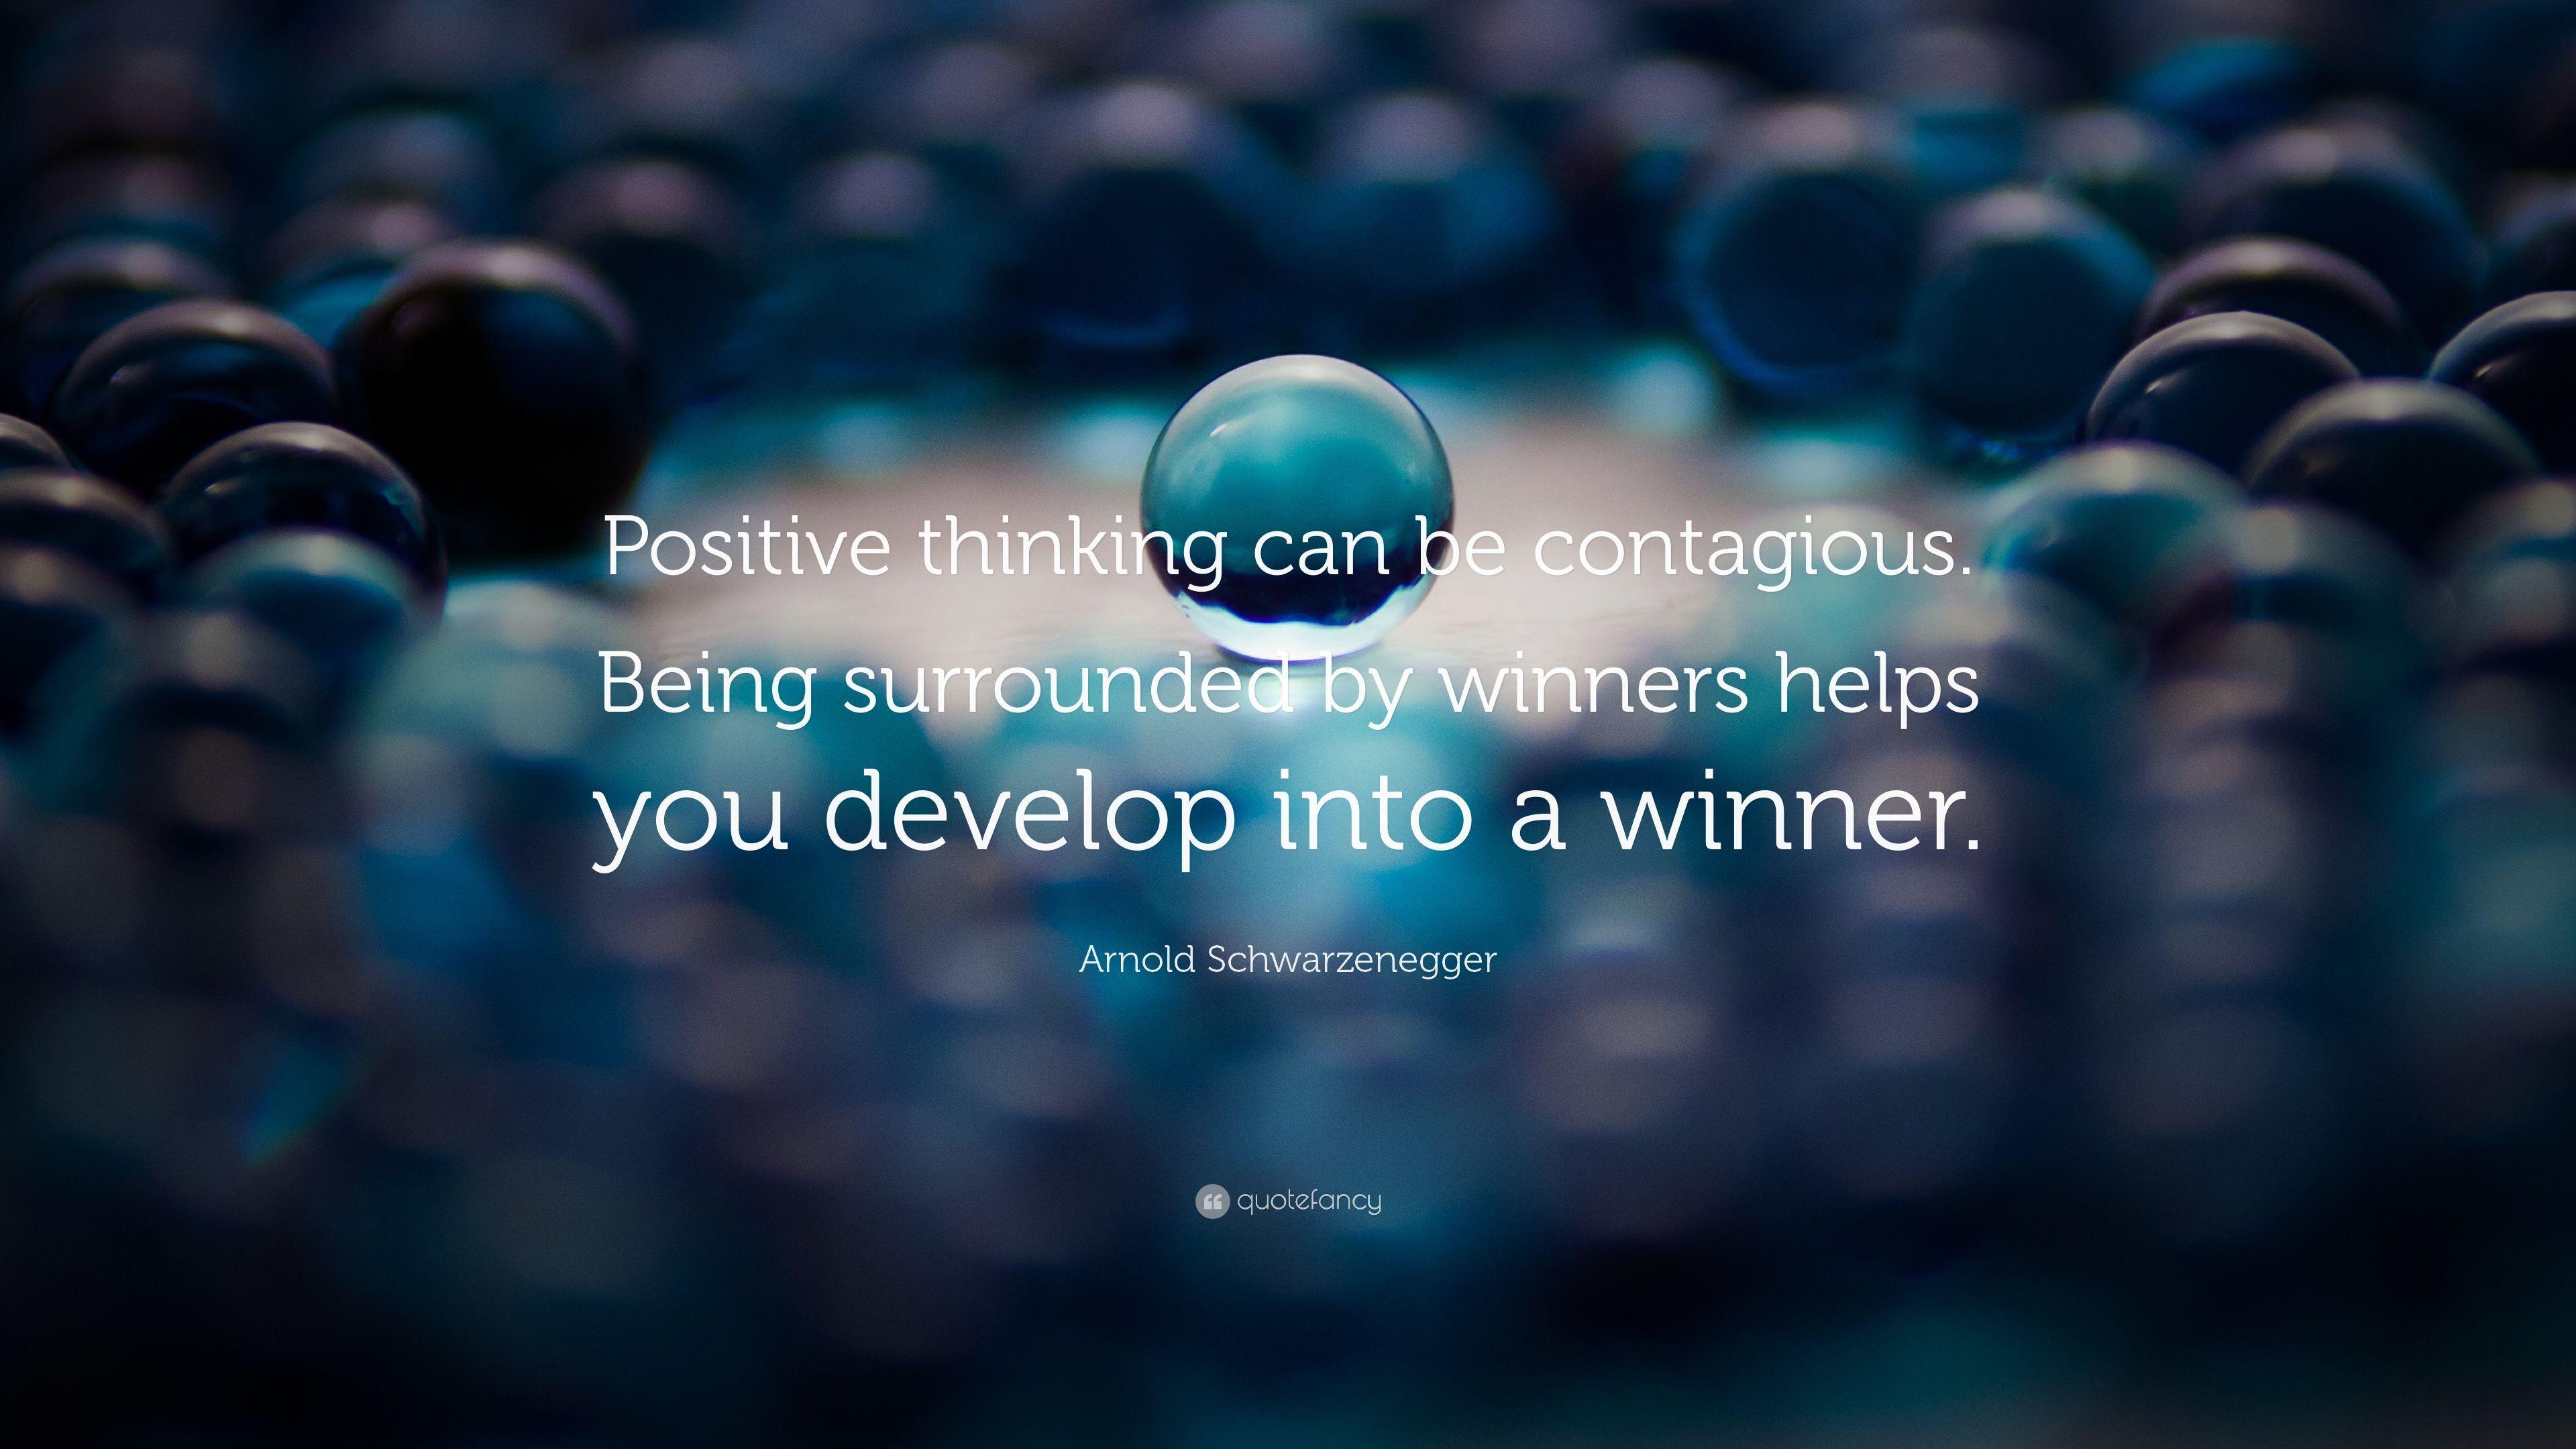 Arnold Schwarzenegger Quote: “Positive thinking can be contagious